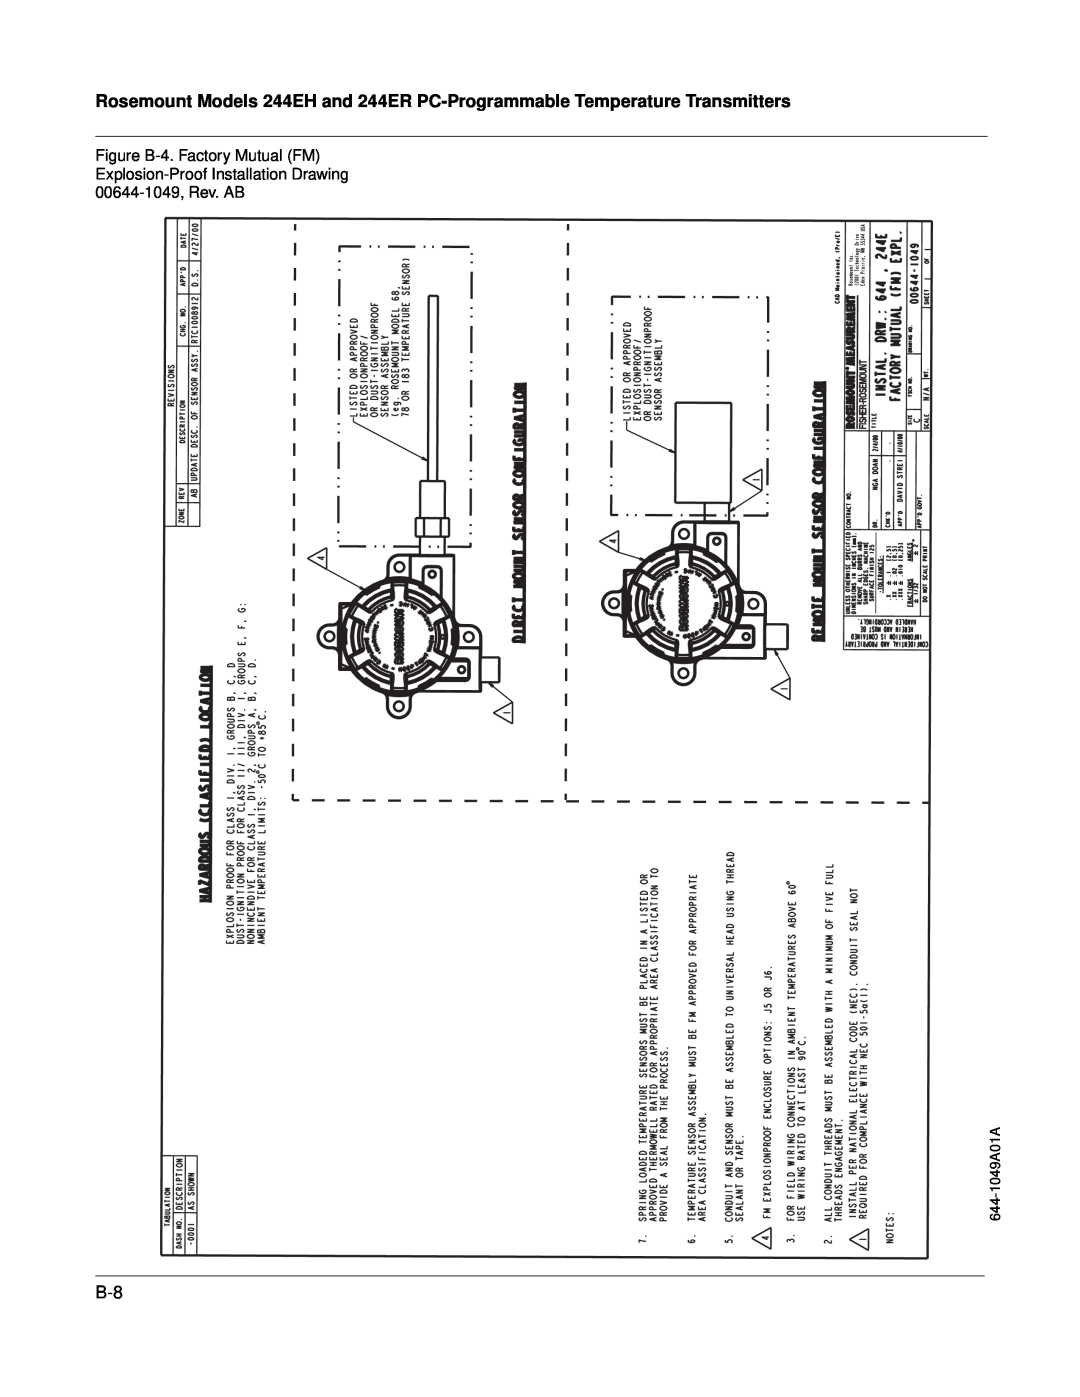 Fisher 244ER, 244EH manual Figure B-4. Factory Mutual FM Explosion-Proof Installation Drawing, 00644-1049, Rev. AB 